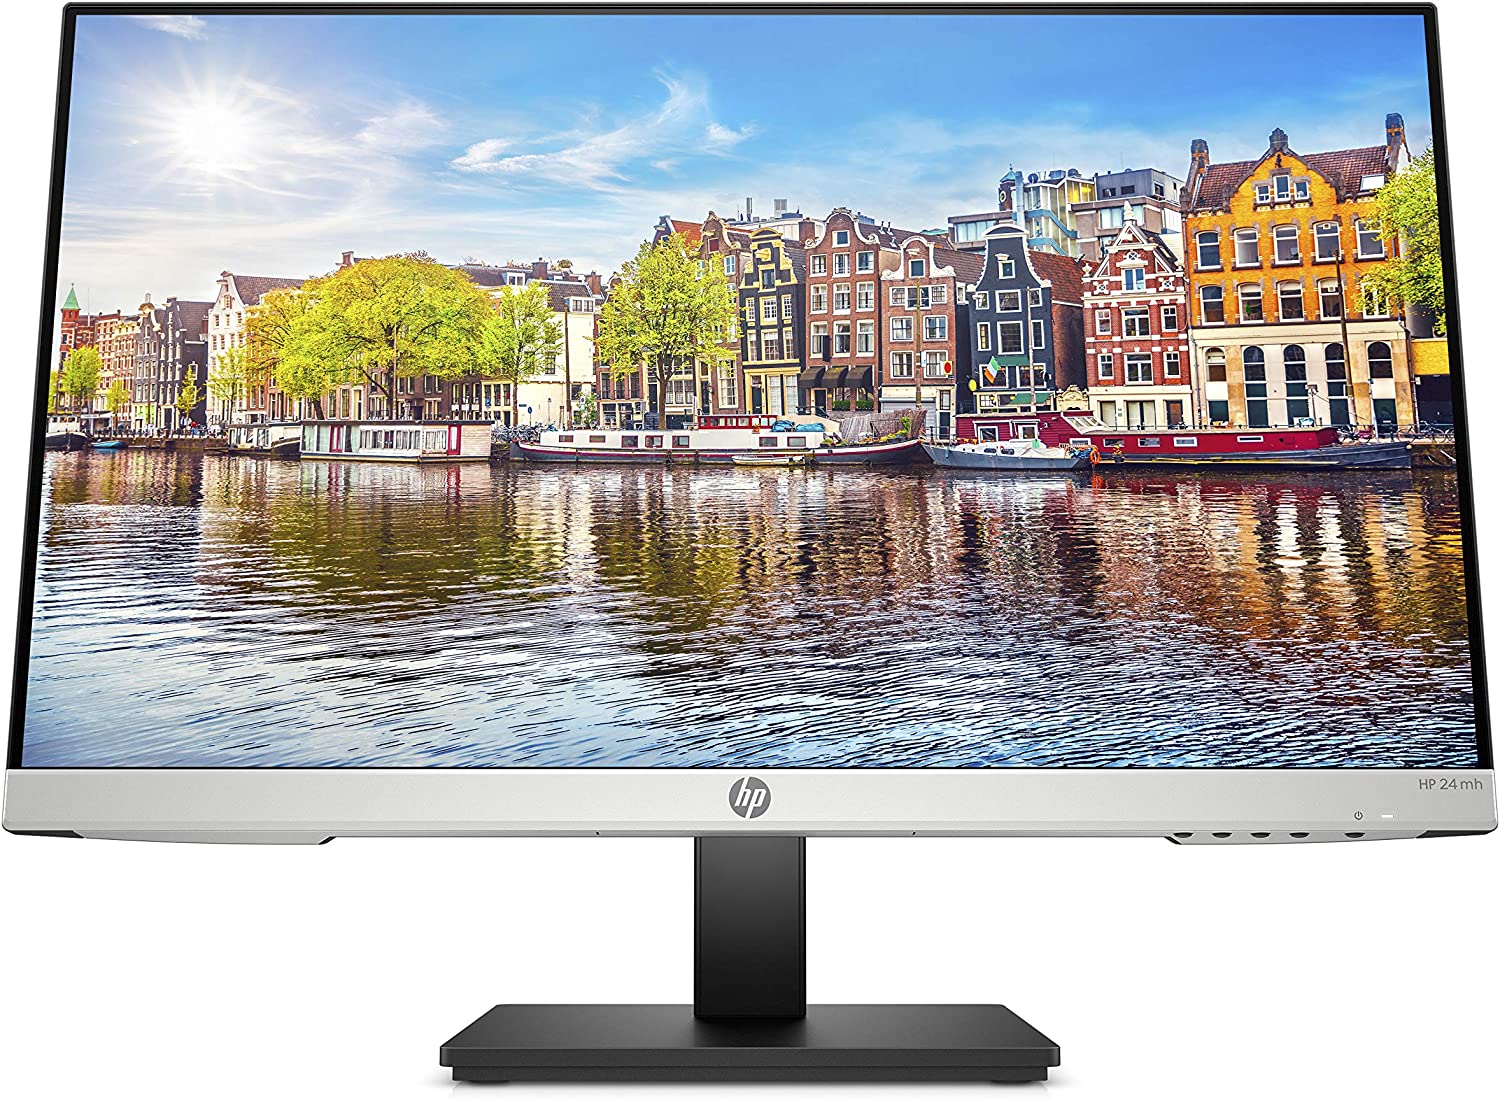 HP 24mh FHD Monitor - Computer Monitor with 23.8-Inch IPS Display (1080p) - Built-In Speakers and VESA Mounting - Height:Tilt Adjustment for Ergonomic